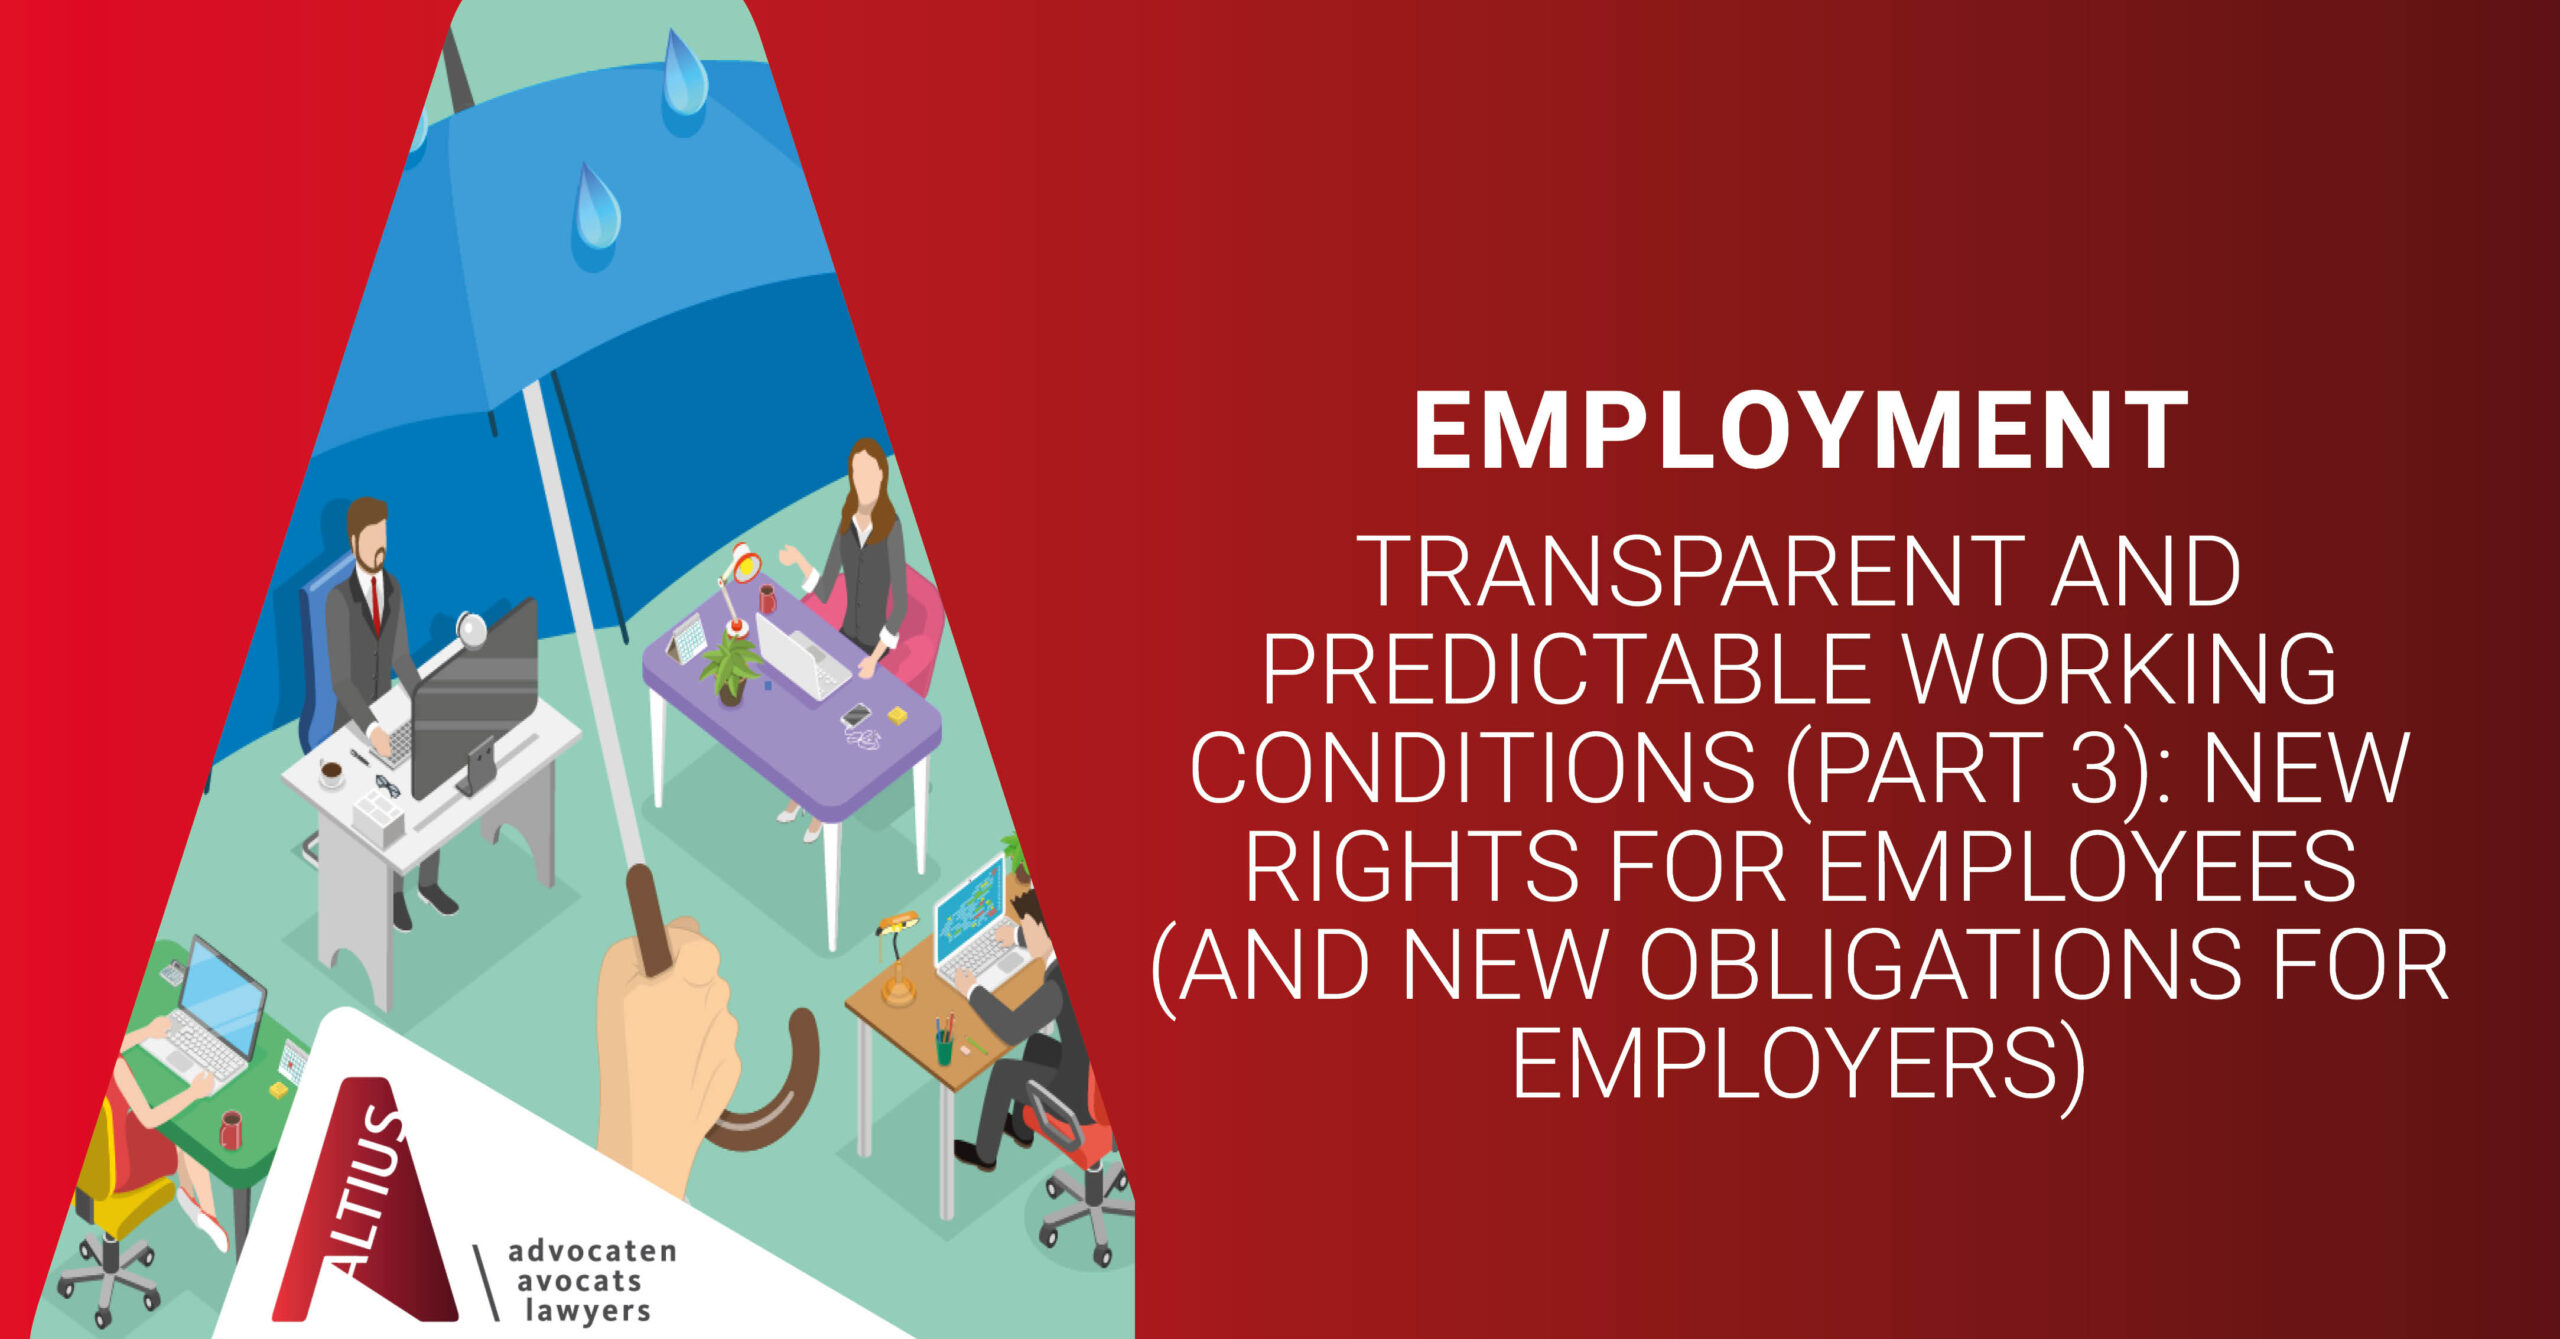 Transparent and predictable working conditions (part 3): new rights for employees (and new obligations for employers)